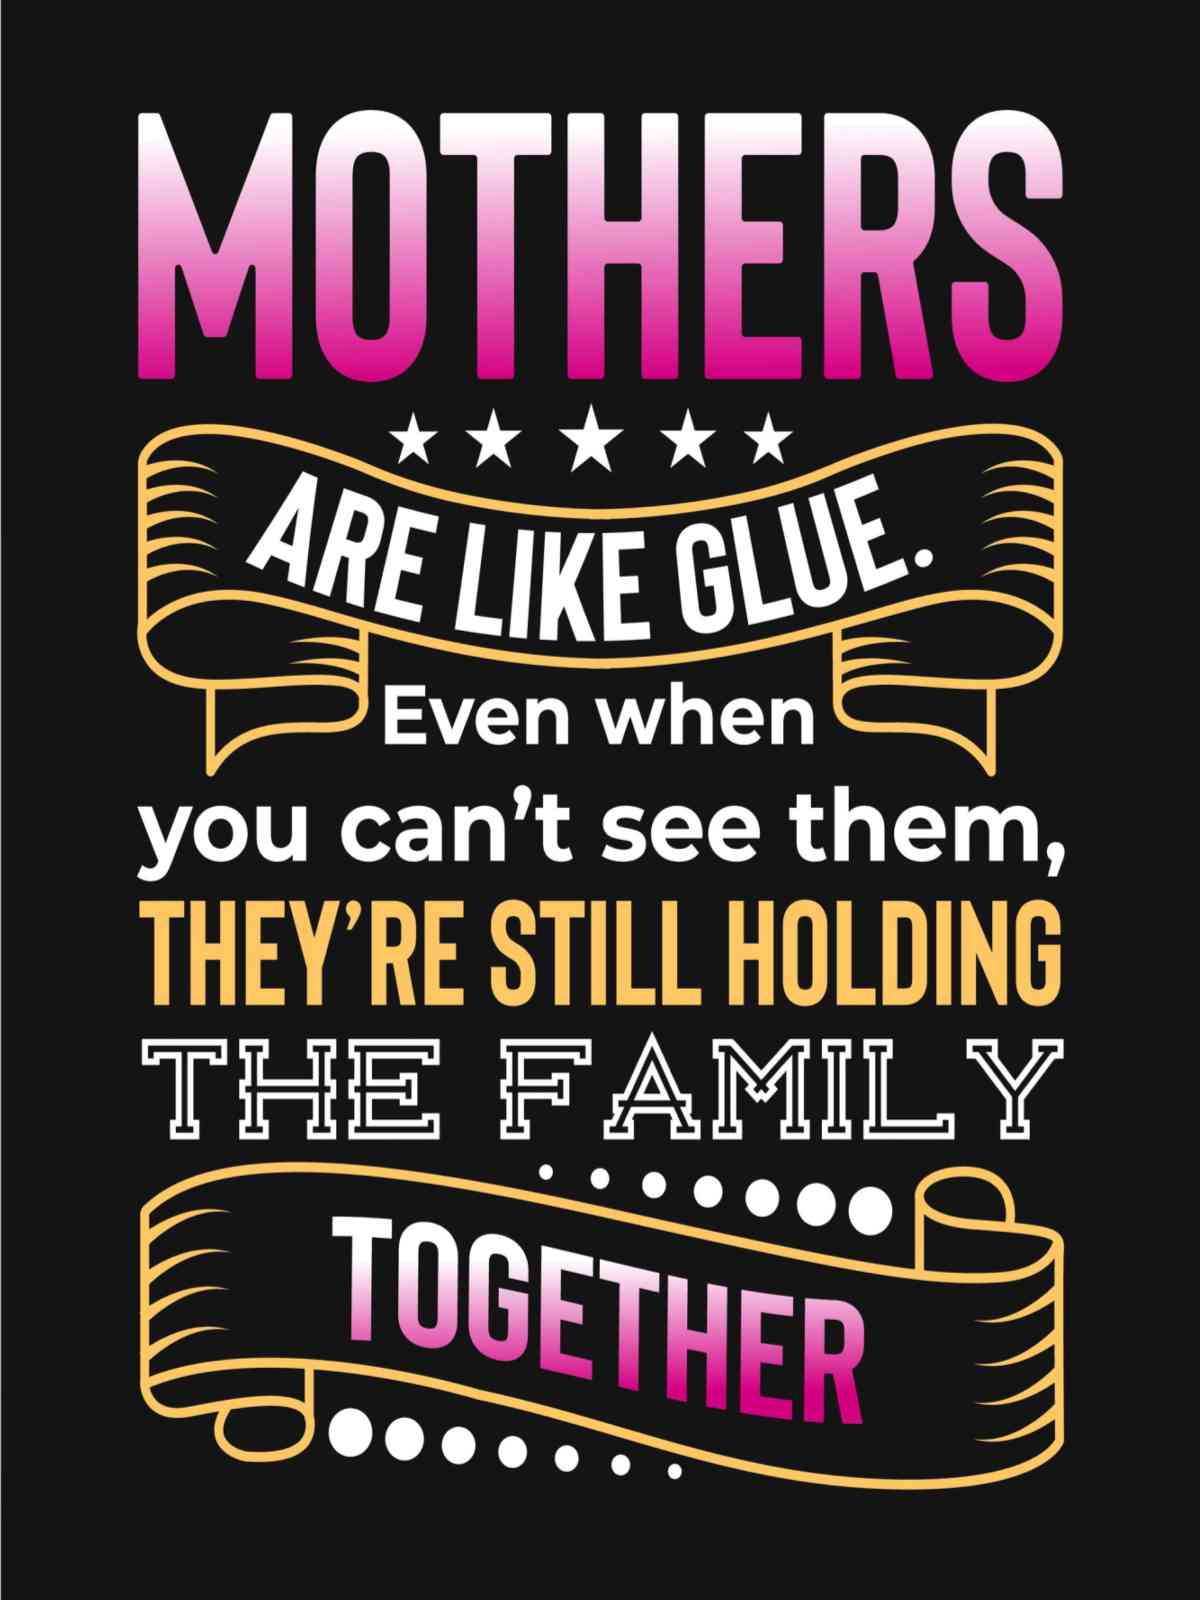 An inspirational mother quote in block lettering on a black background.